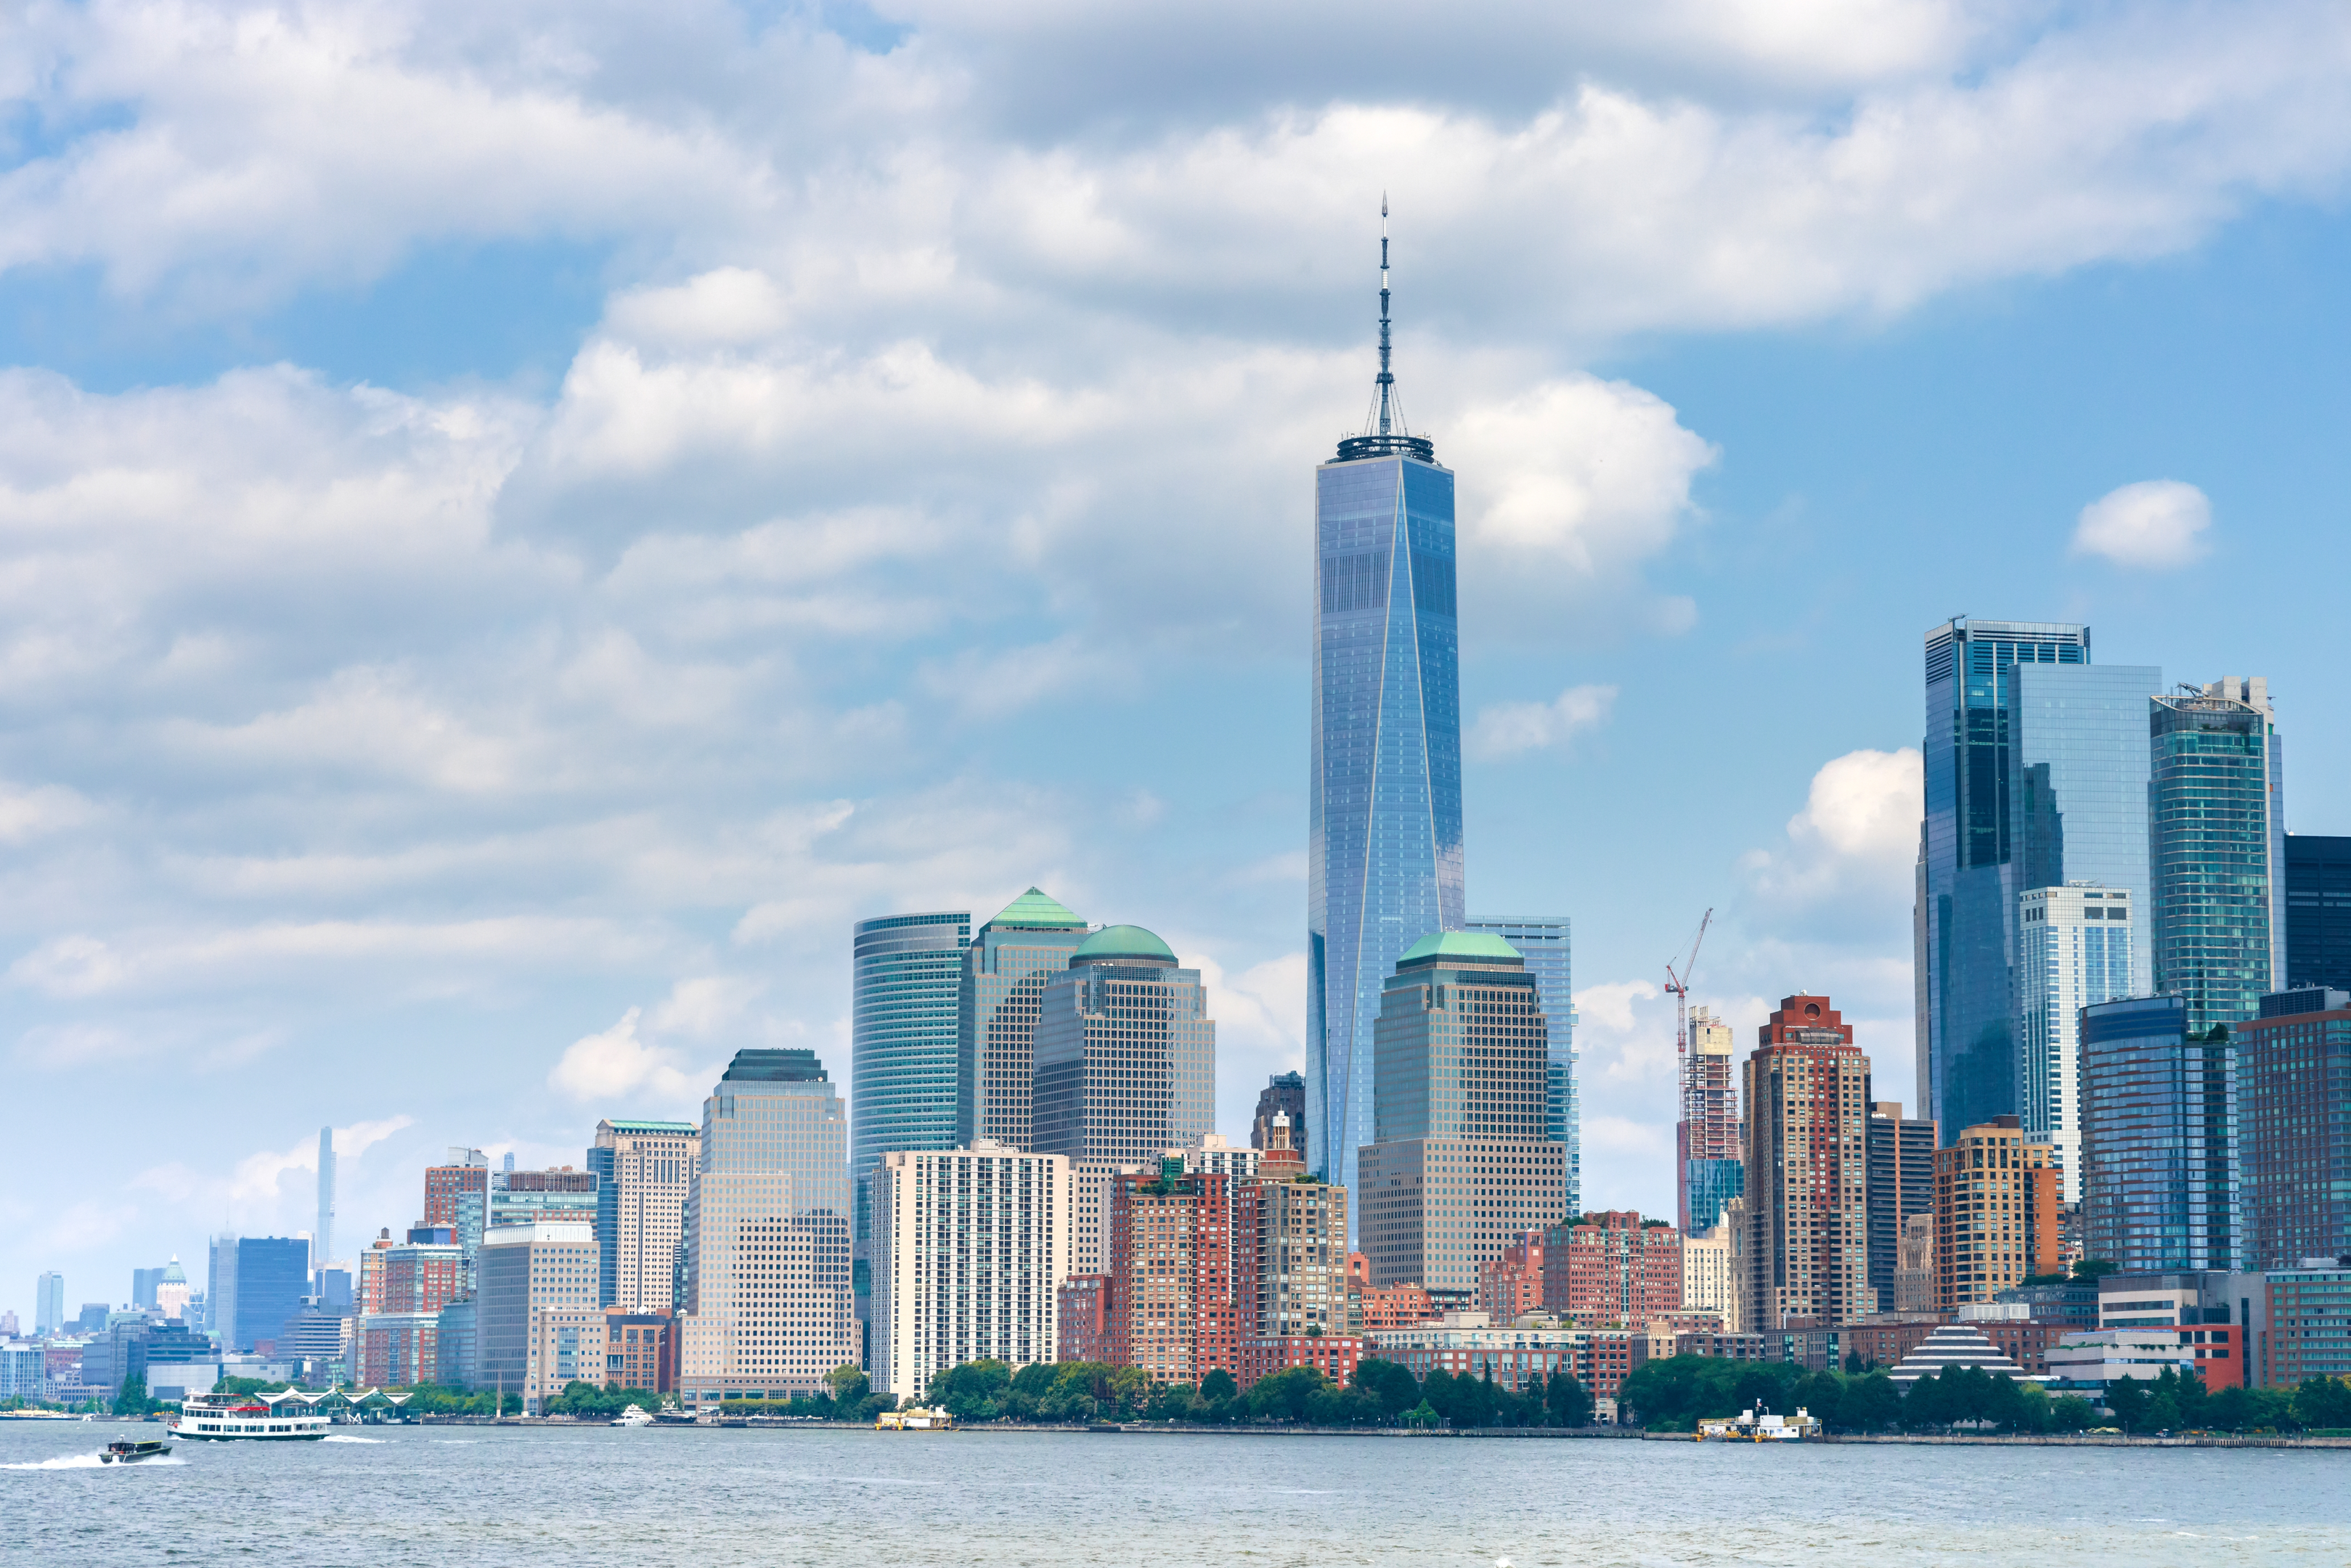 Skyline of NYC with view of one world trade center and empire state building